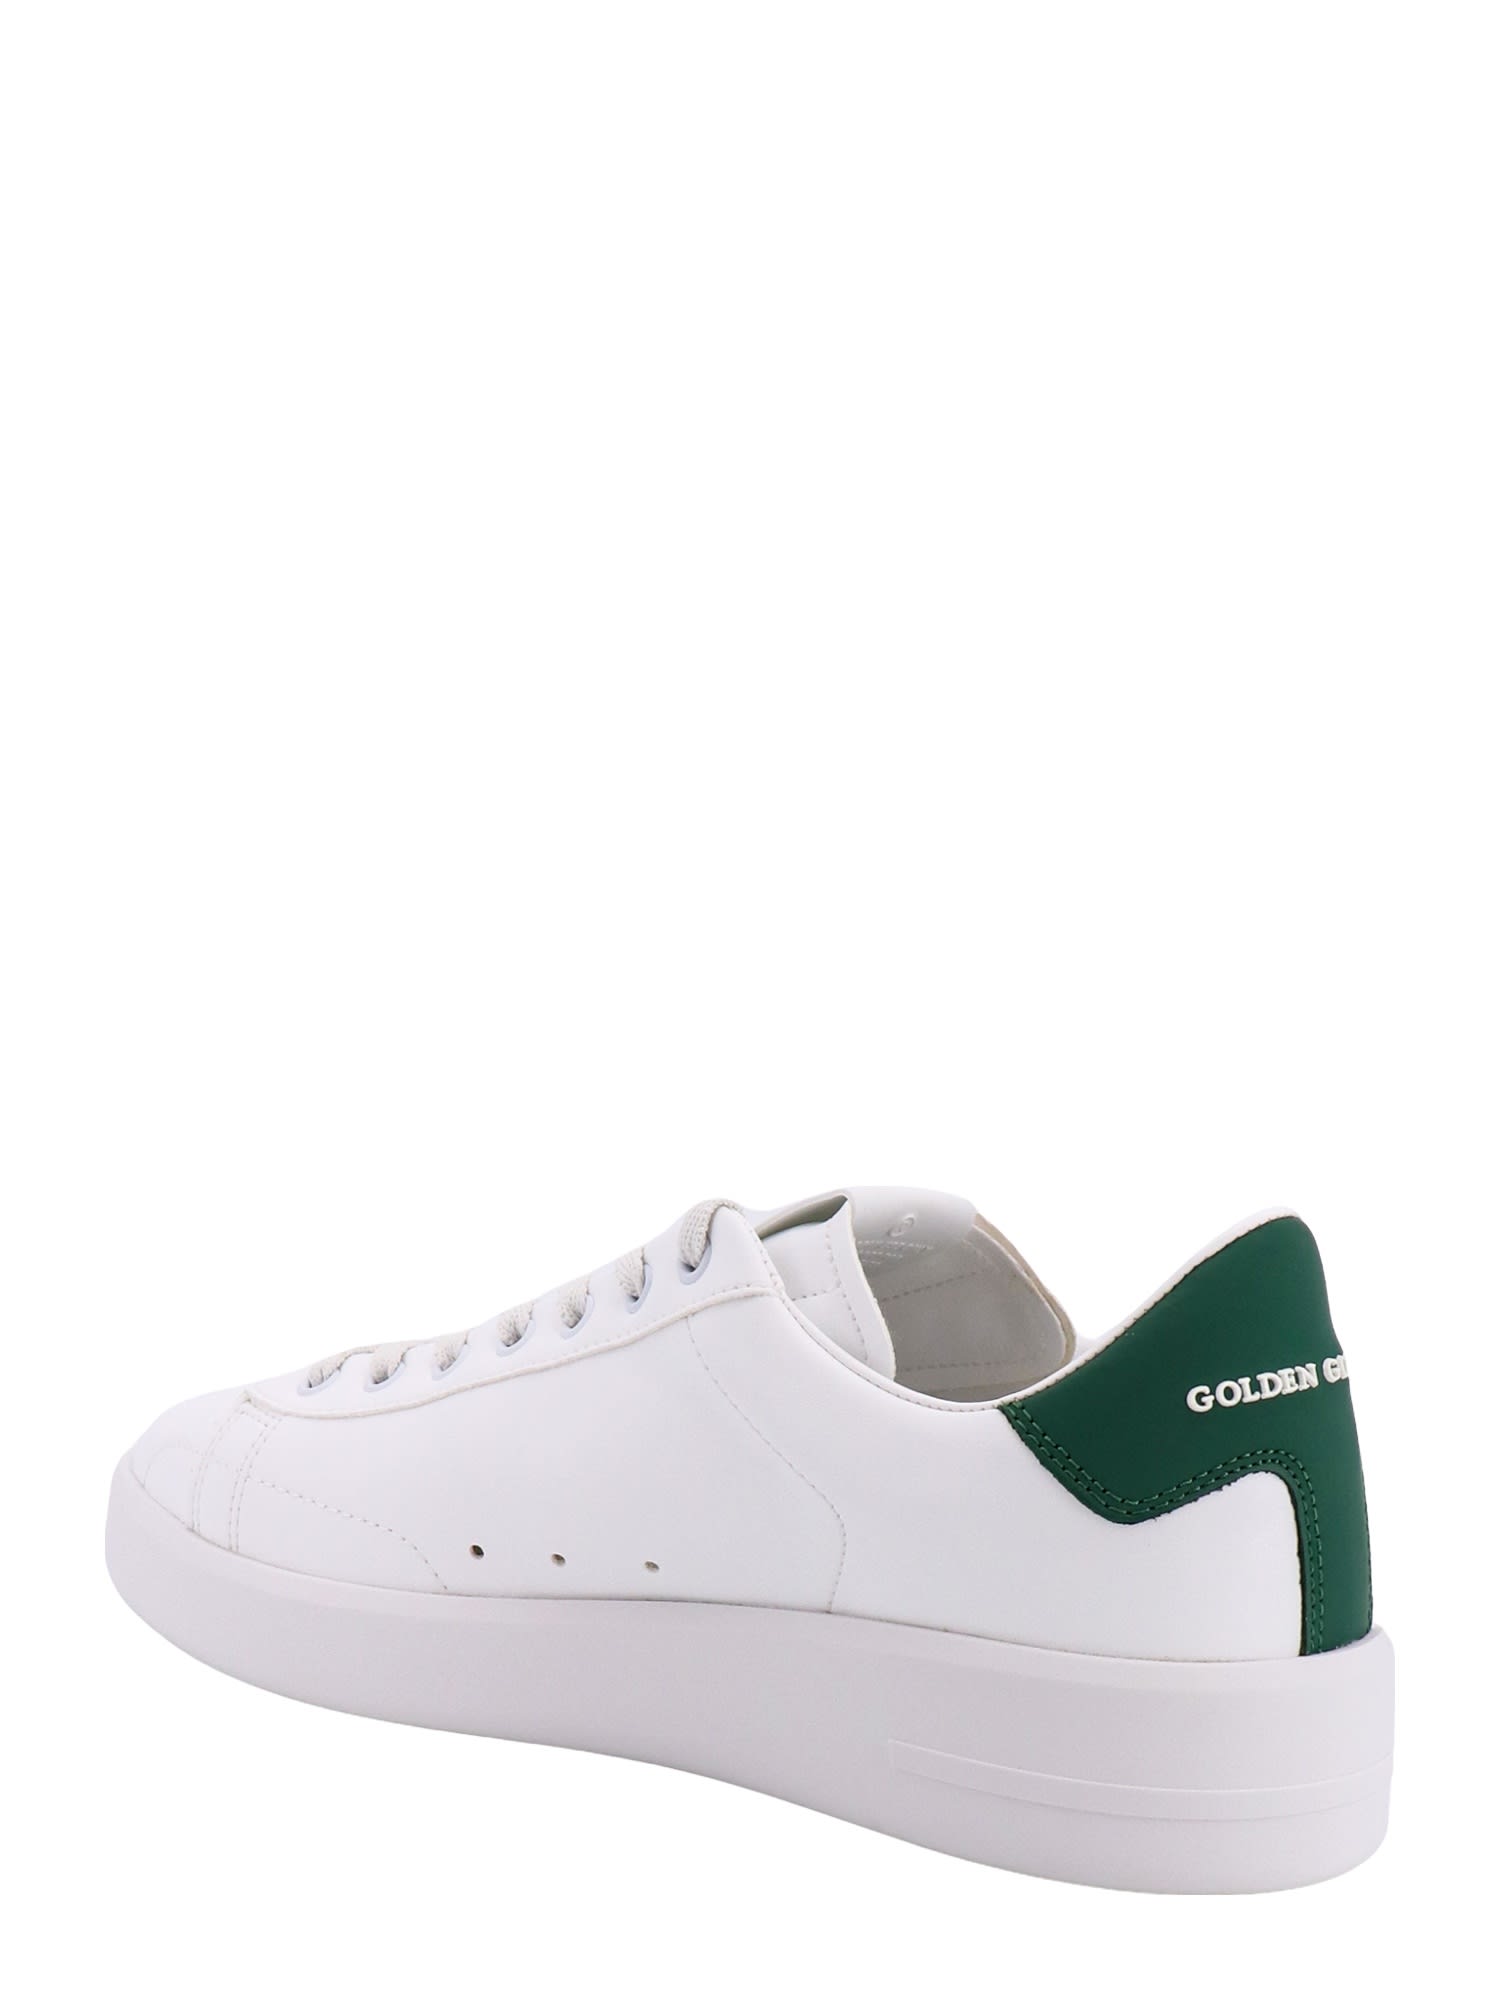 Shop Golden Goose Pure New Sneakers In White/green